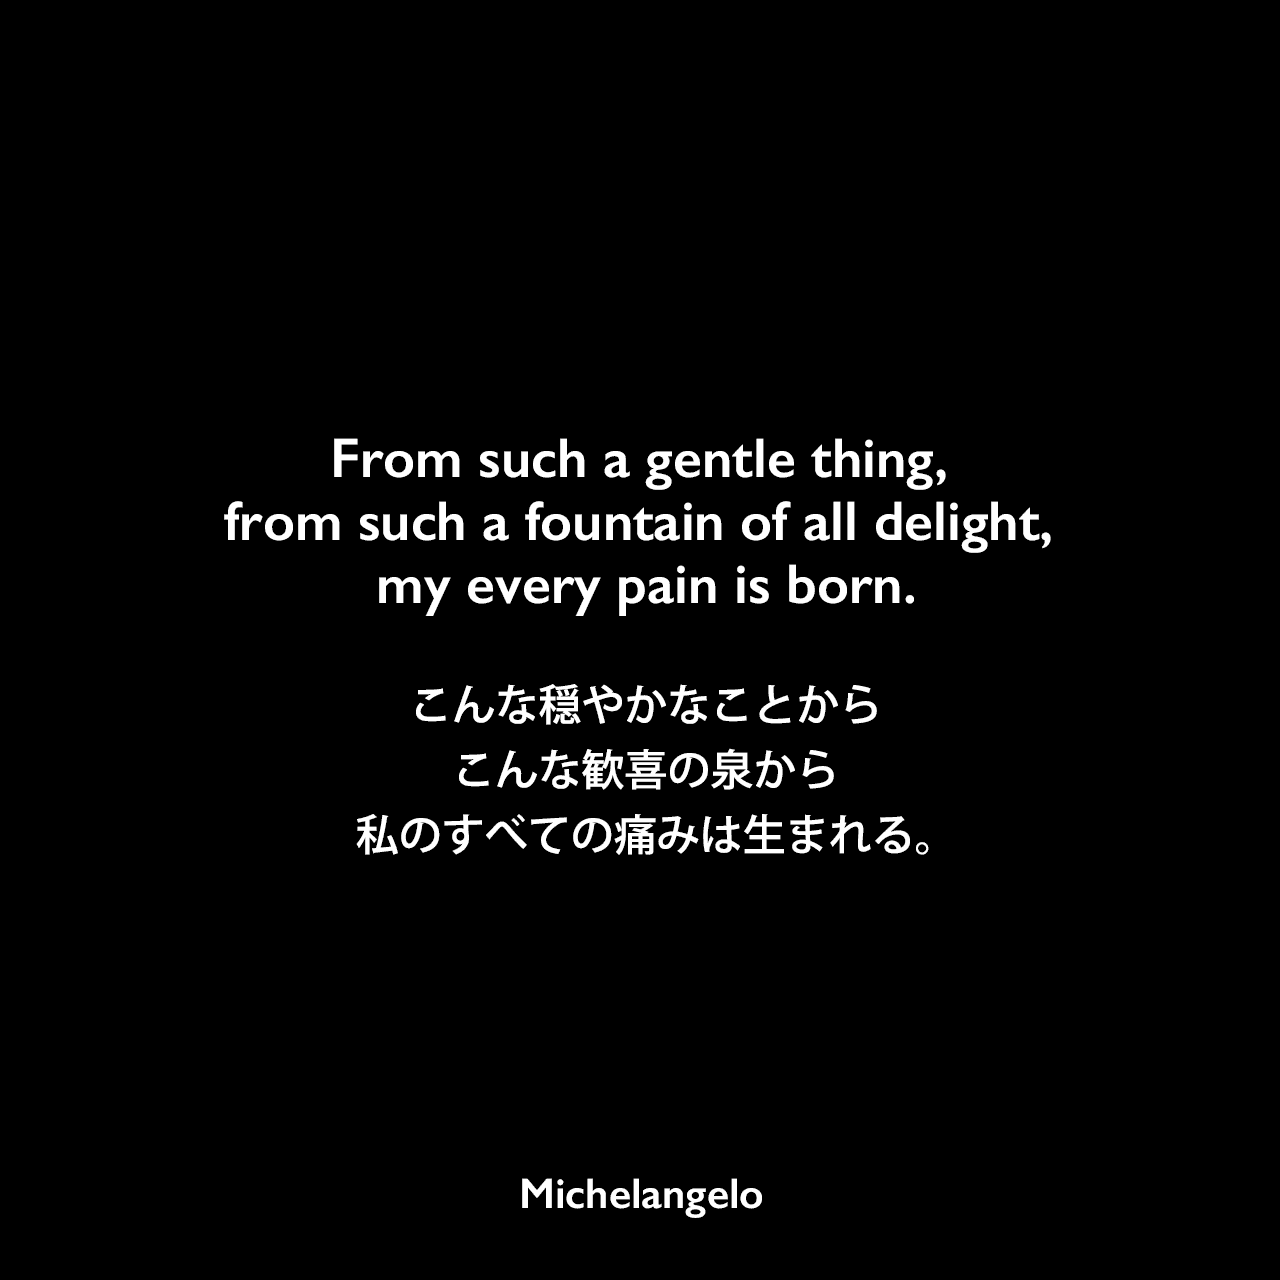 From such a gentle thing, from such a fountain of all delight, my every pain is born.こんな穏やかなことから、こんな歓喜の泉から、私のすべての痛みは生まれる。Michelangelo